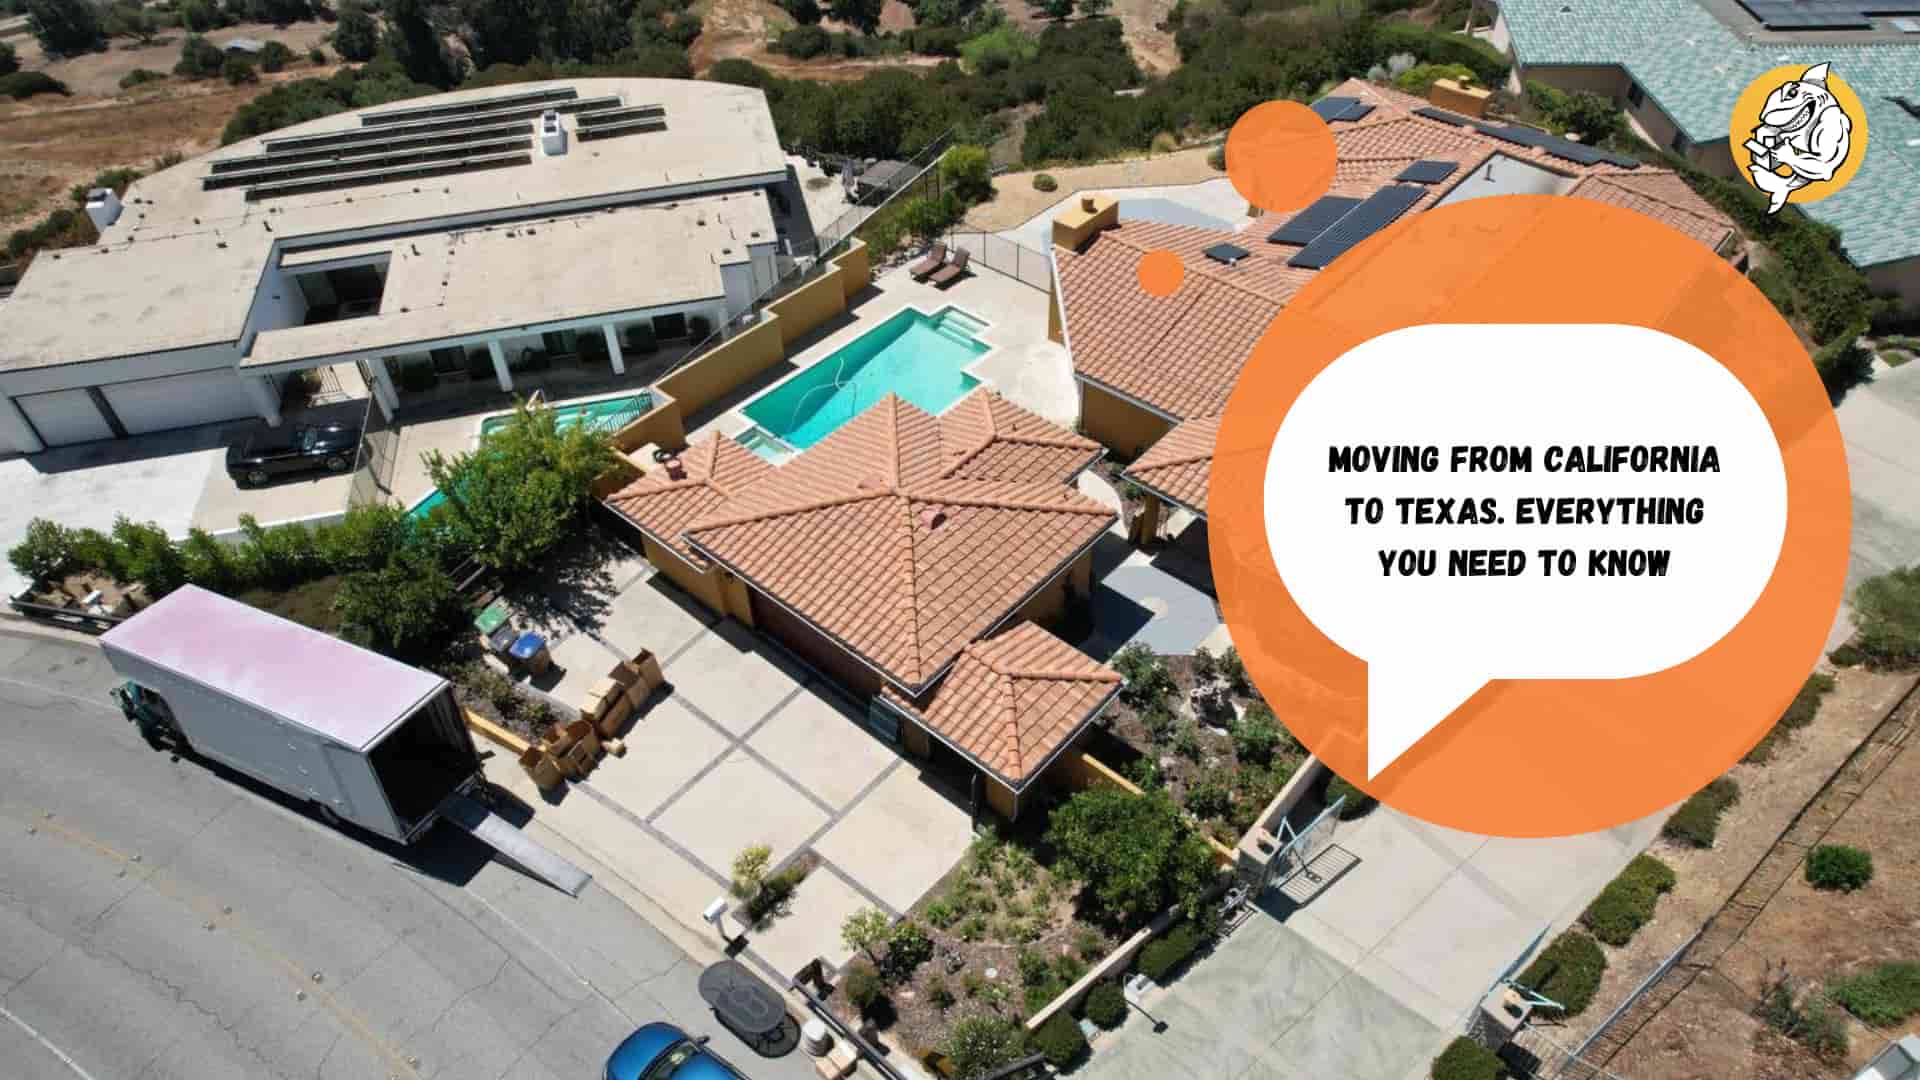 Moving From California To Texas. Everything You Need To Know